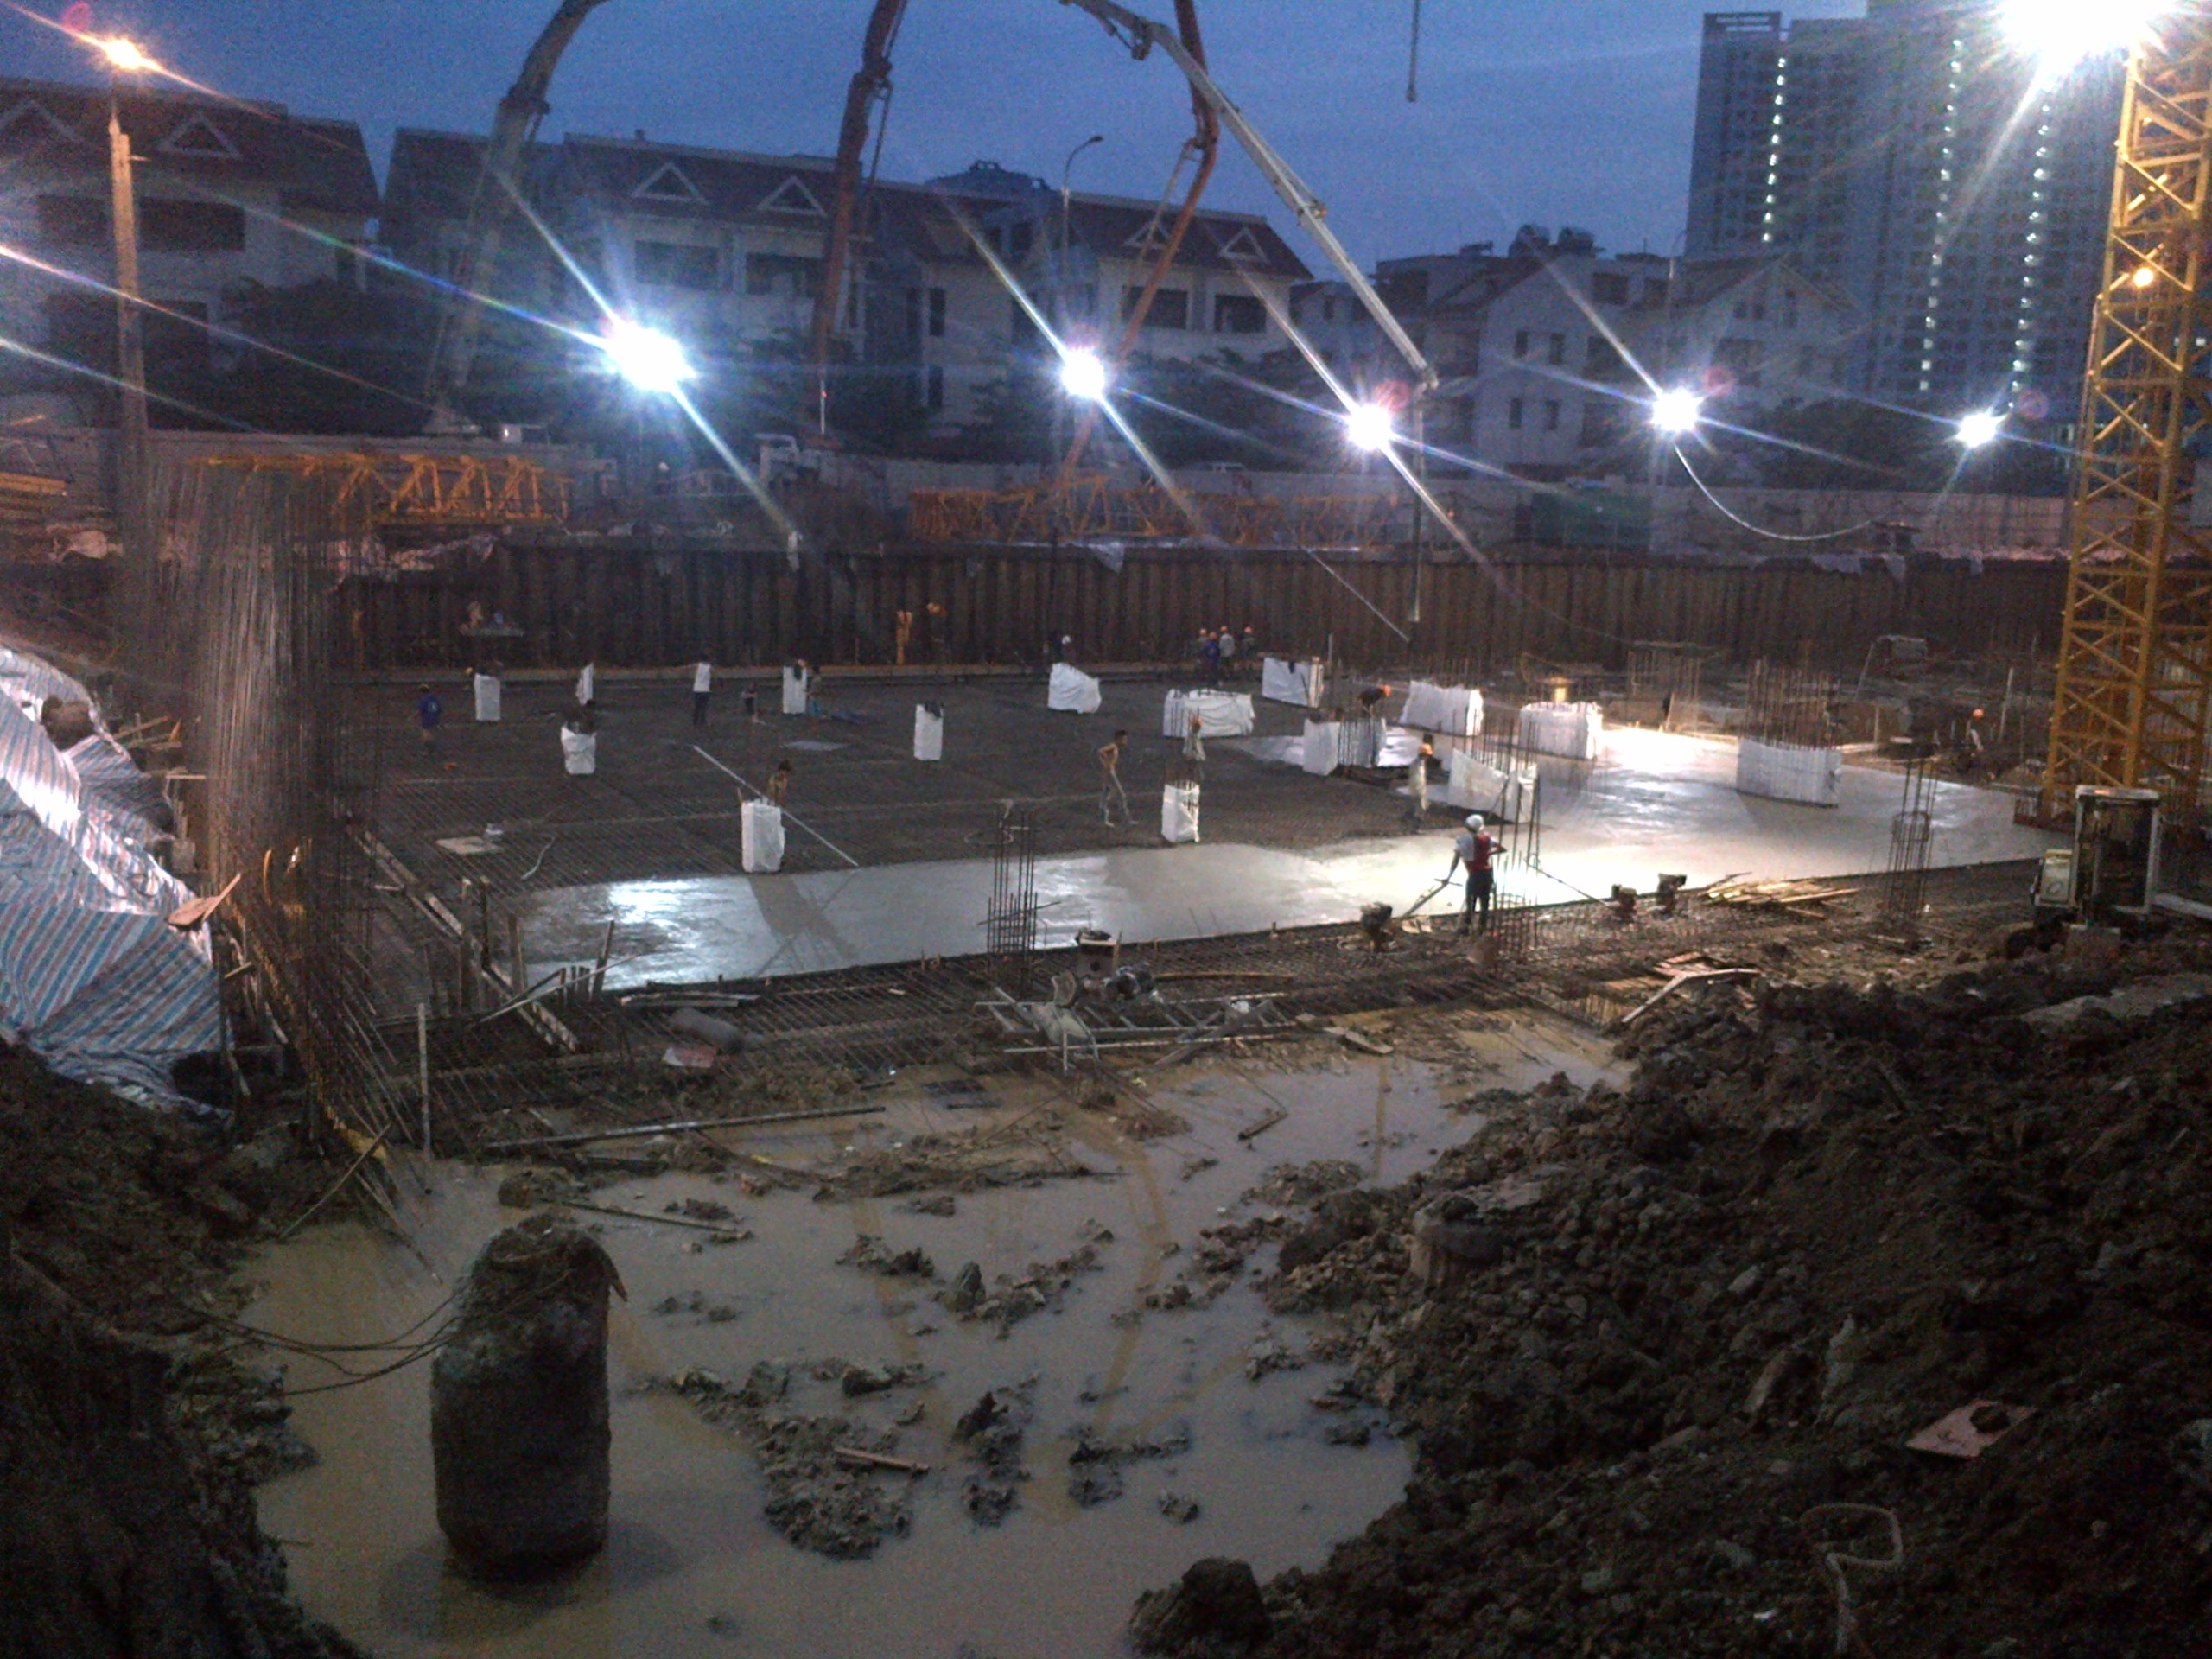 Getting started in Hanoi: The concrete pour for the foundation slabs of the An Binh City residential towers (each 28-35 floors) began at night.